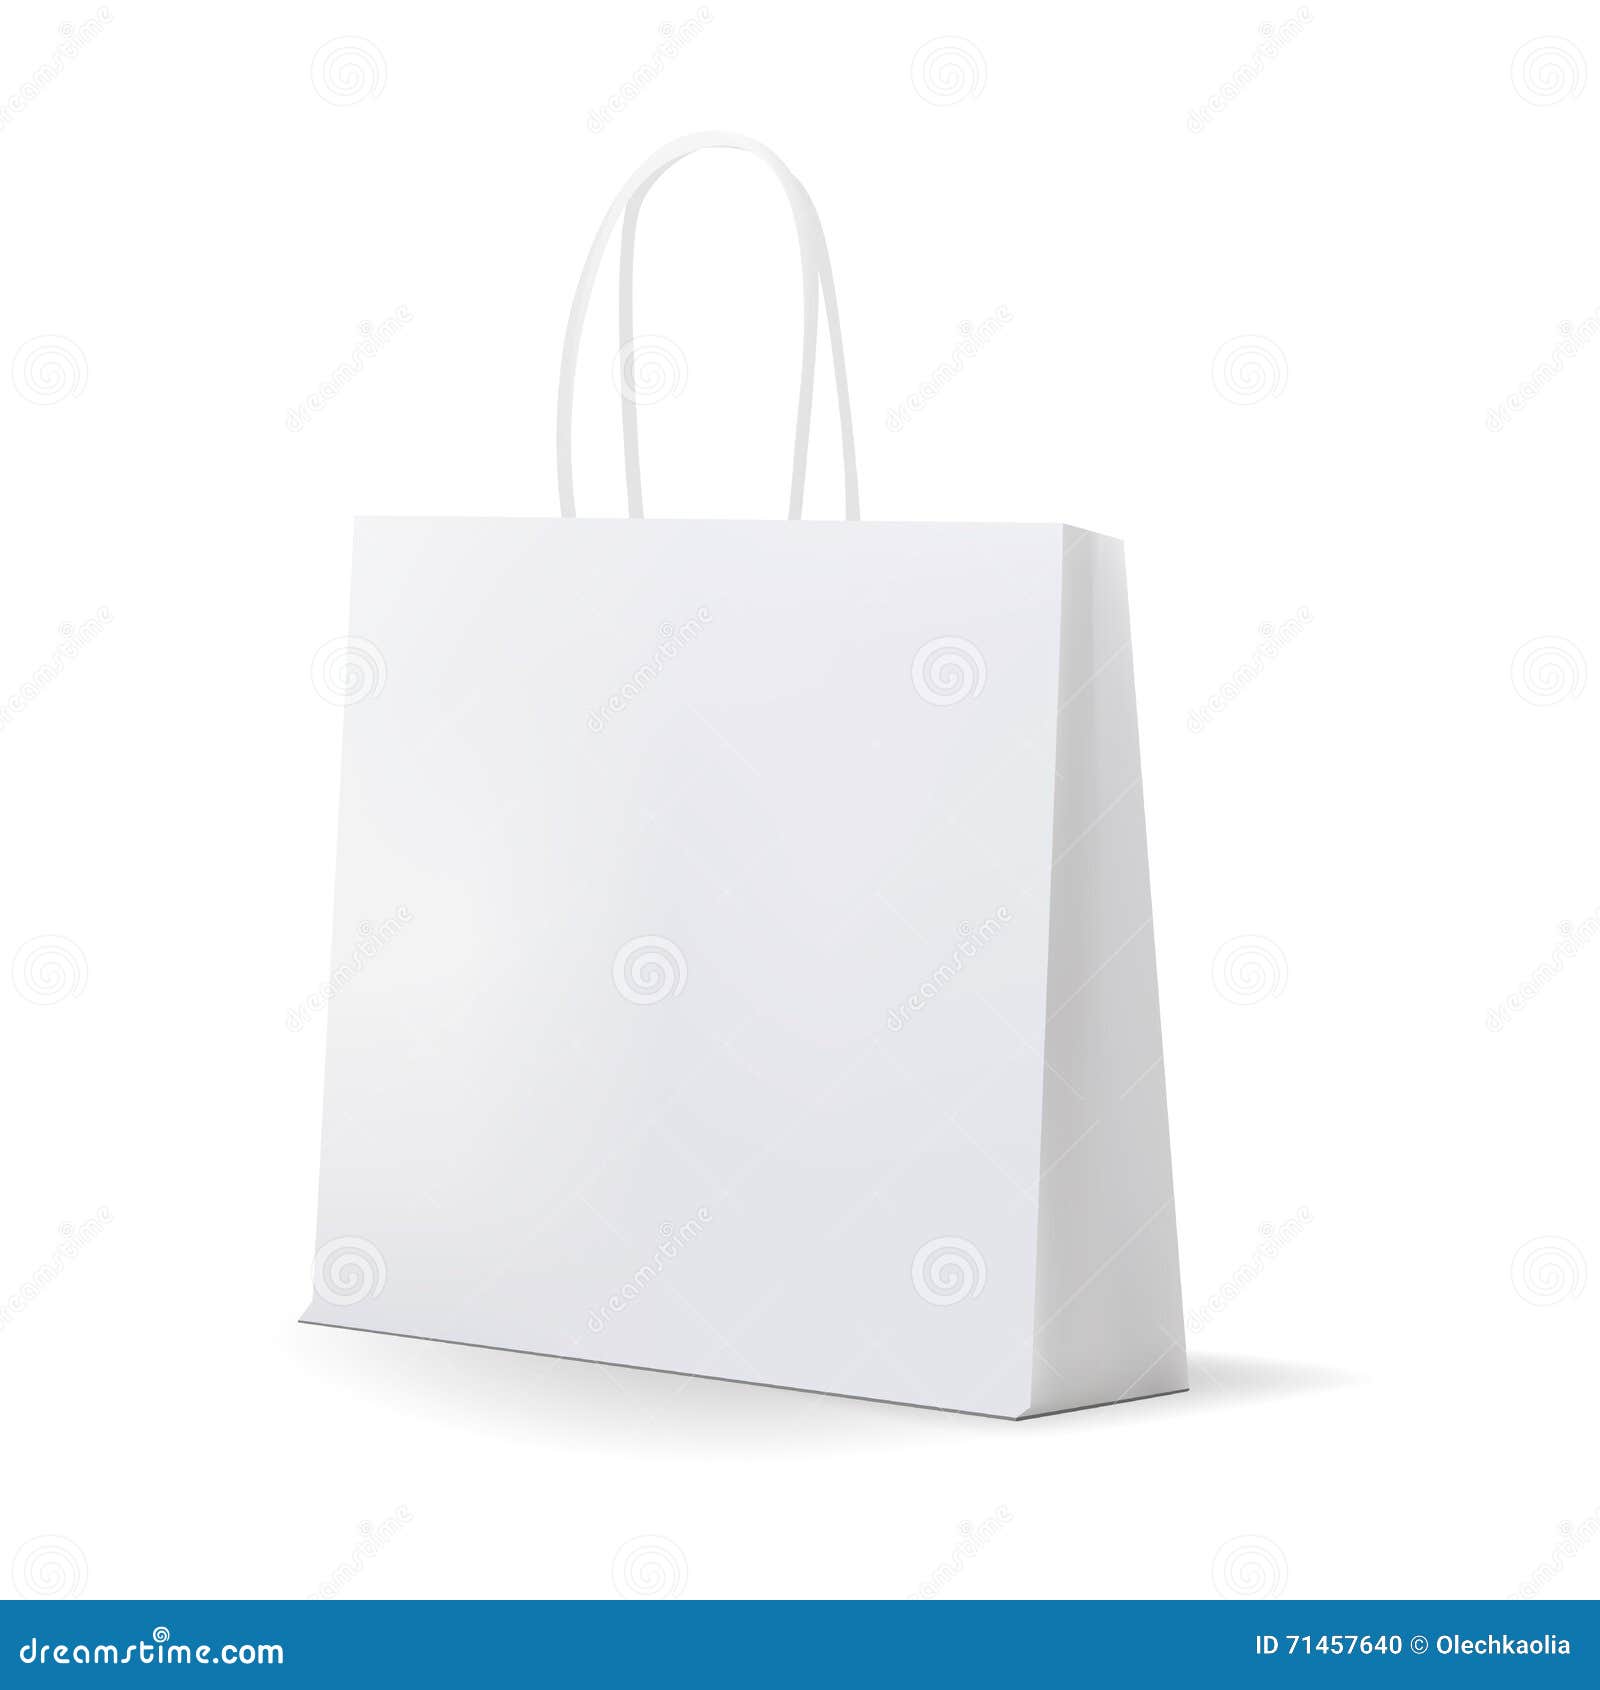 Download Empty Shopping Bag For Advertising And Branding Cartoon ...